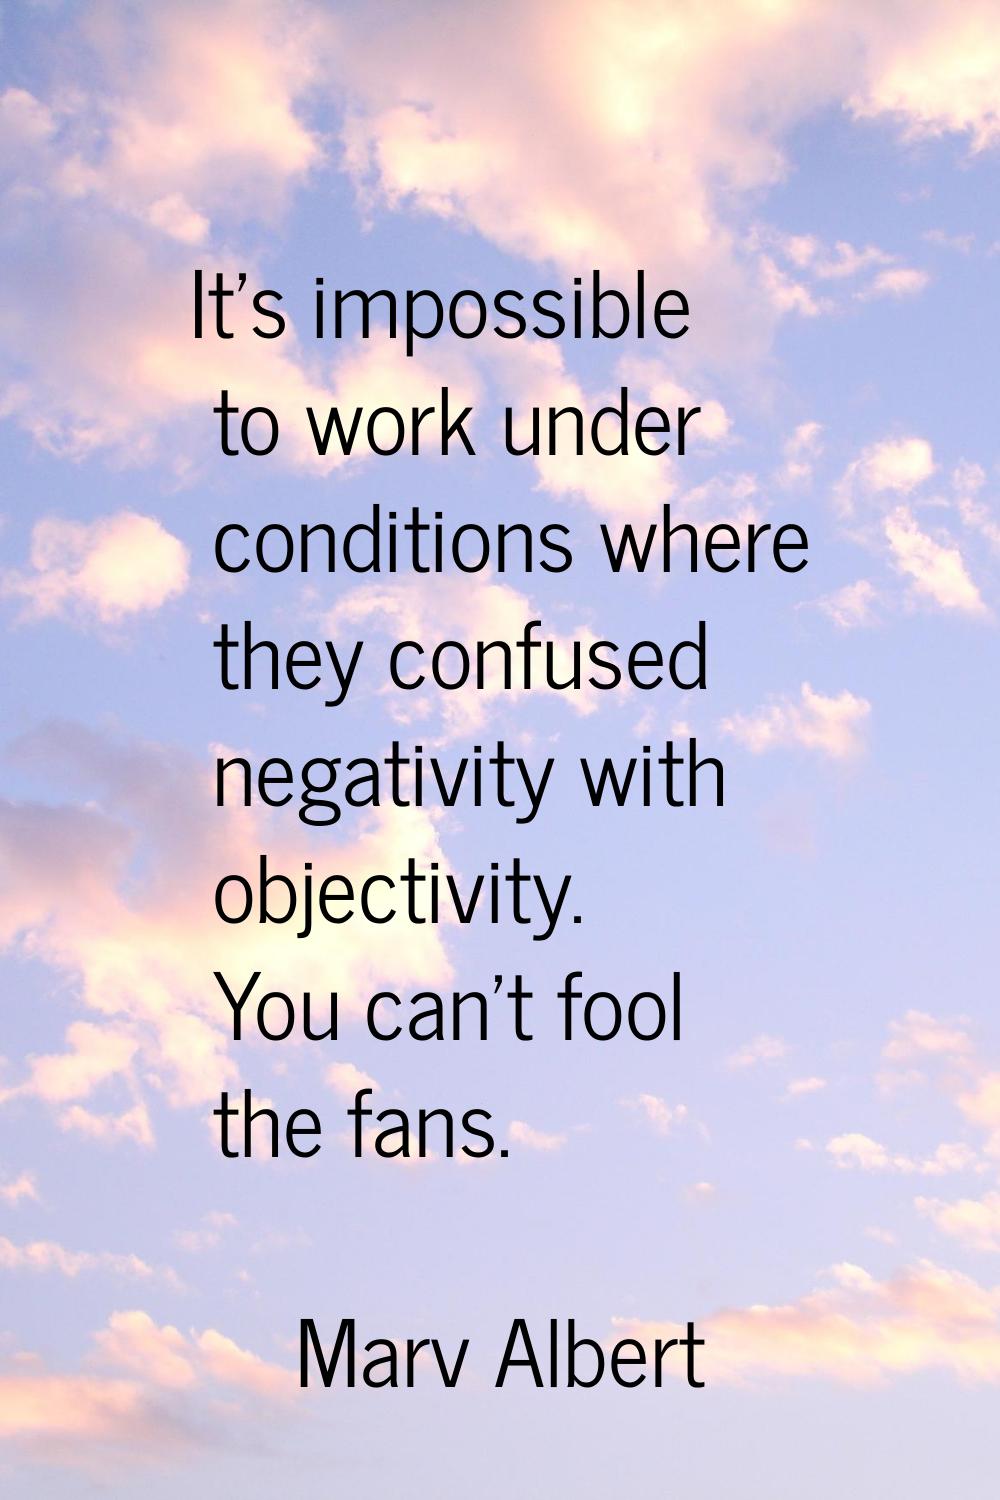 It's impossible to work under conditions where they confused negativity with objectivity. You can't